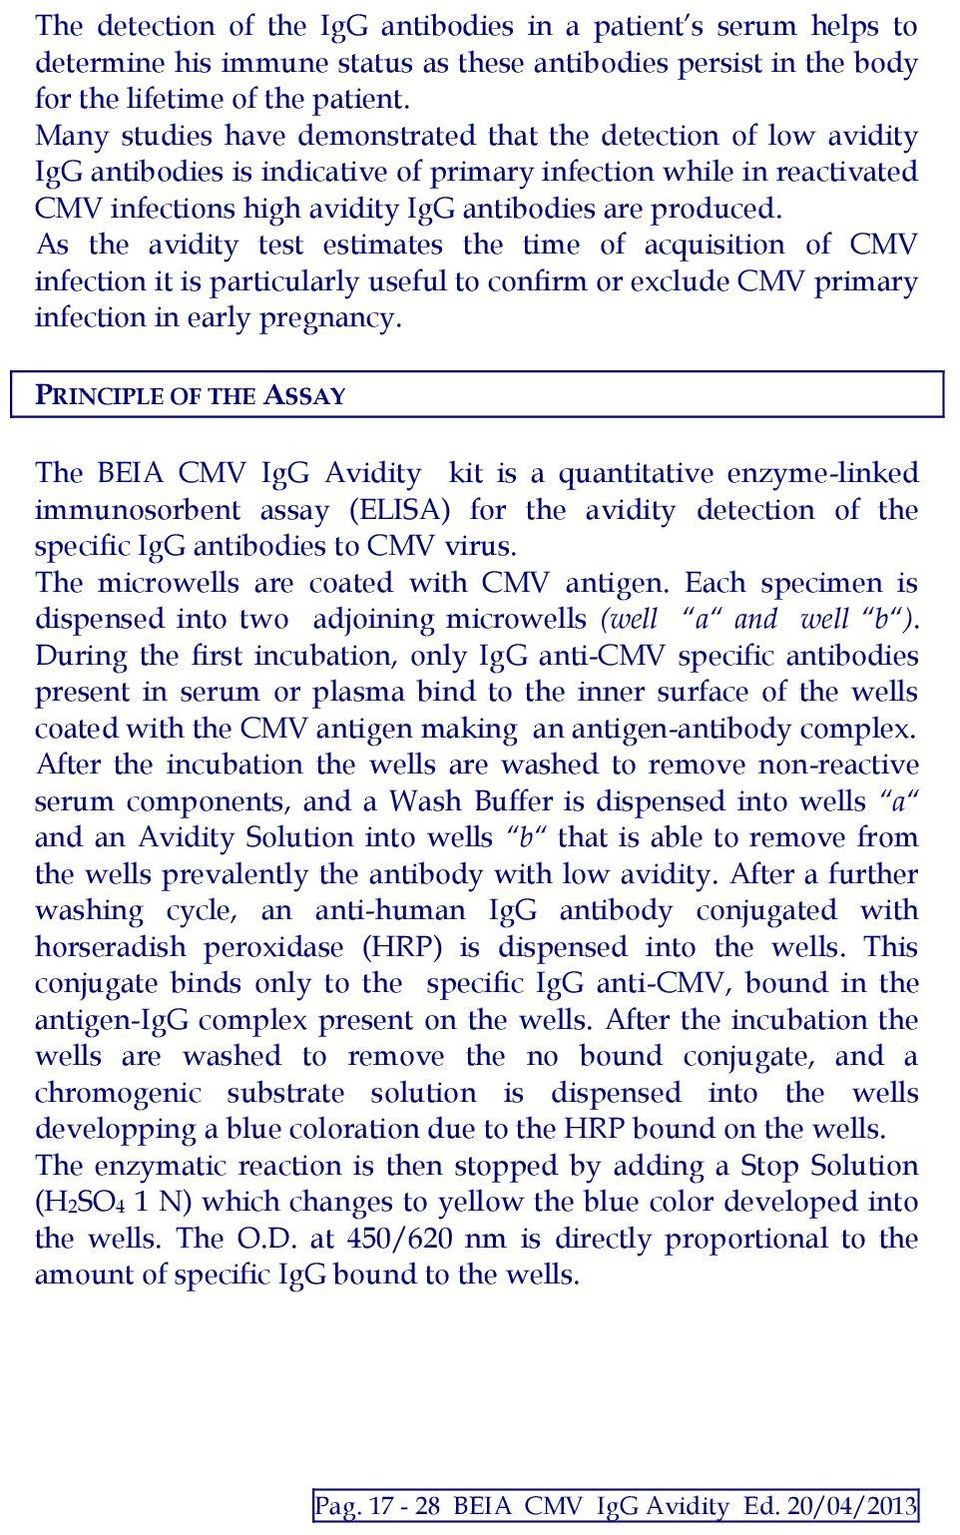 As the avidity test estimates the time of acquisition of CMV infection it is particularly useful to confirm or exclude CMV primary infection in early pregnancy.